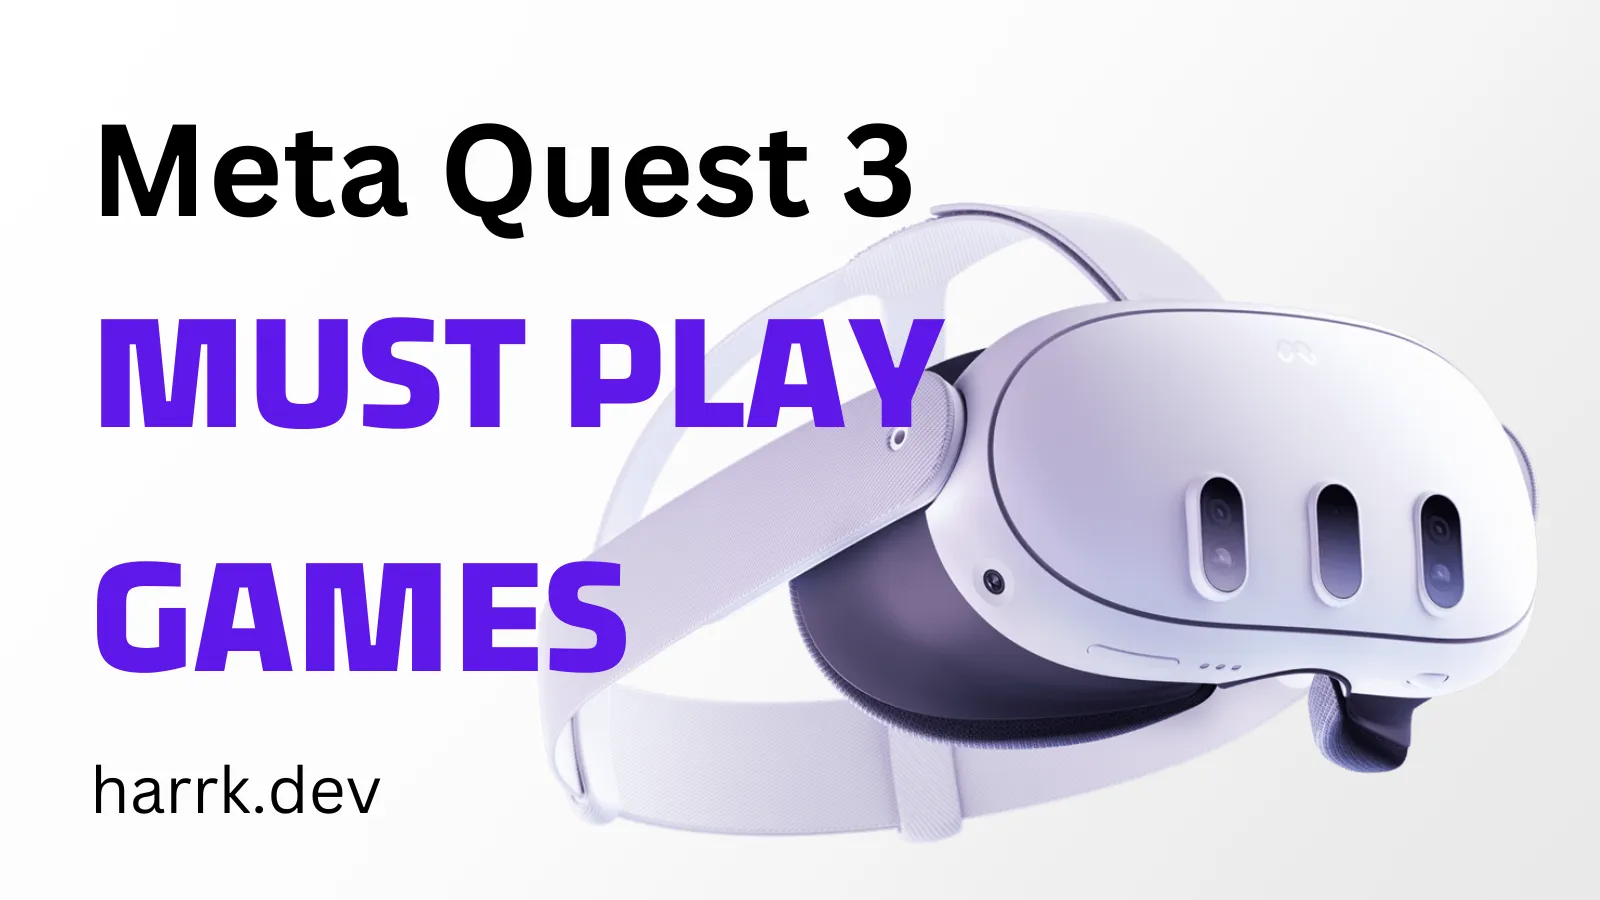 Meta Quest 3 Review: The All-Rounder VR Headset